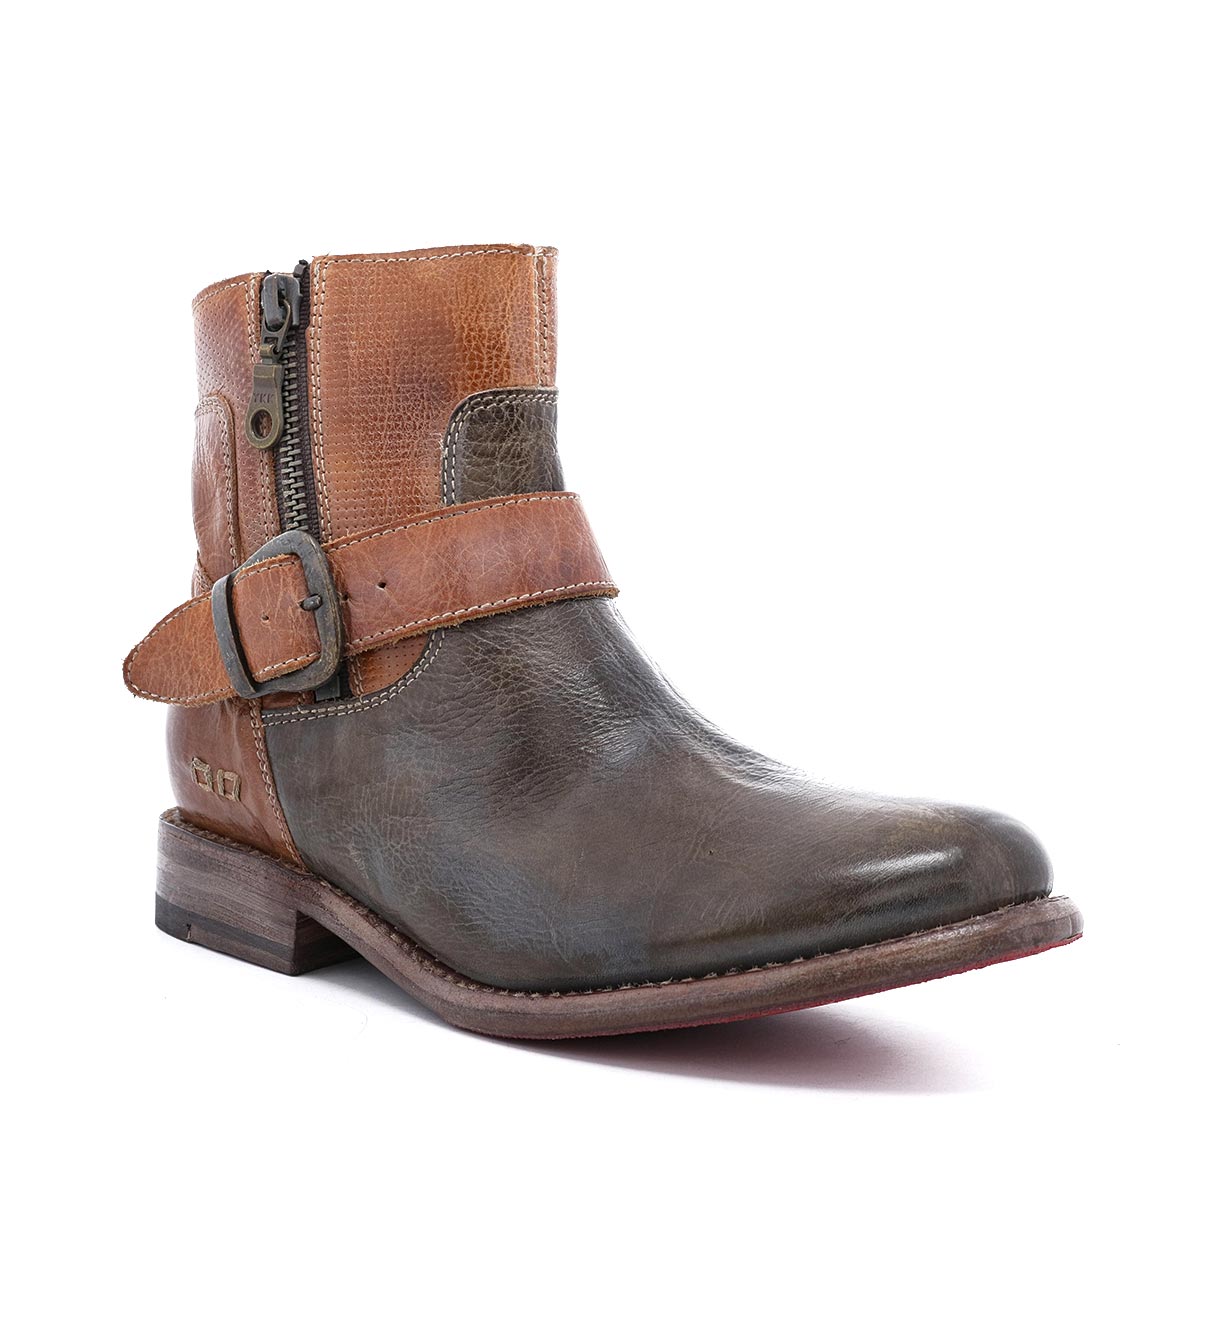 A pair of Becca boots by Bed Stu with a buckle on the side.